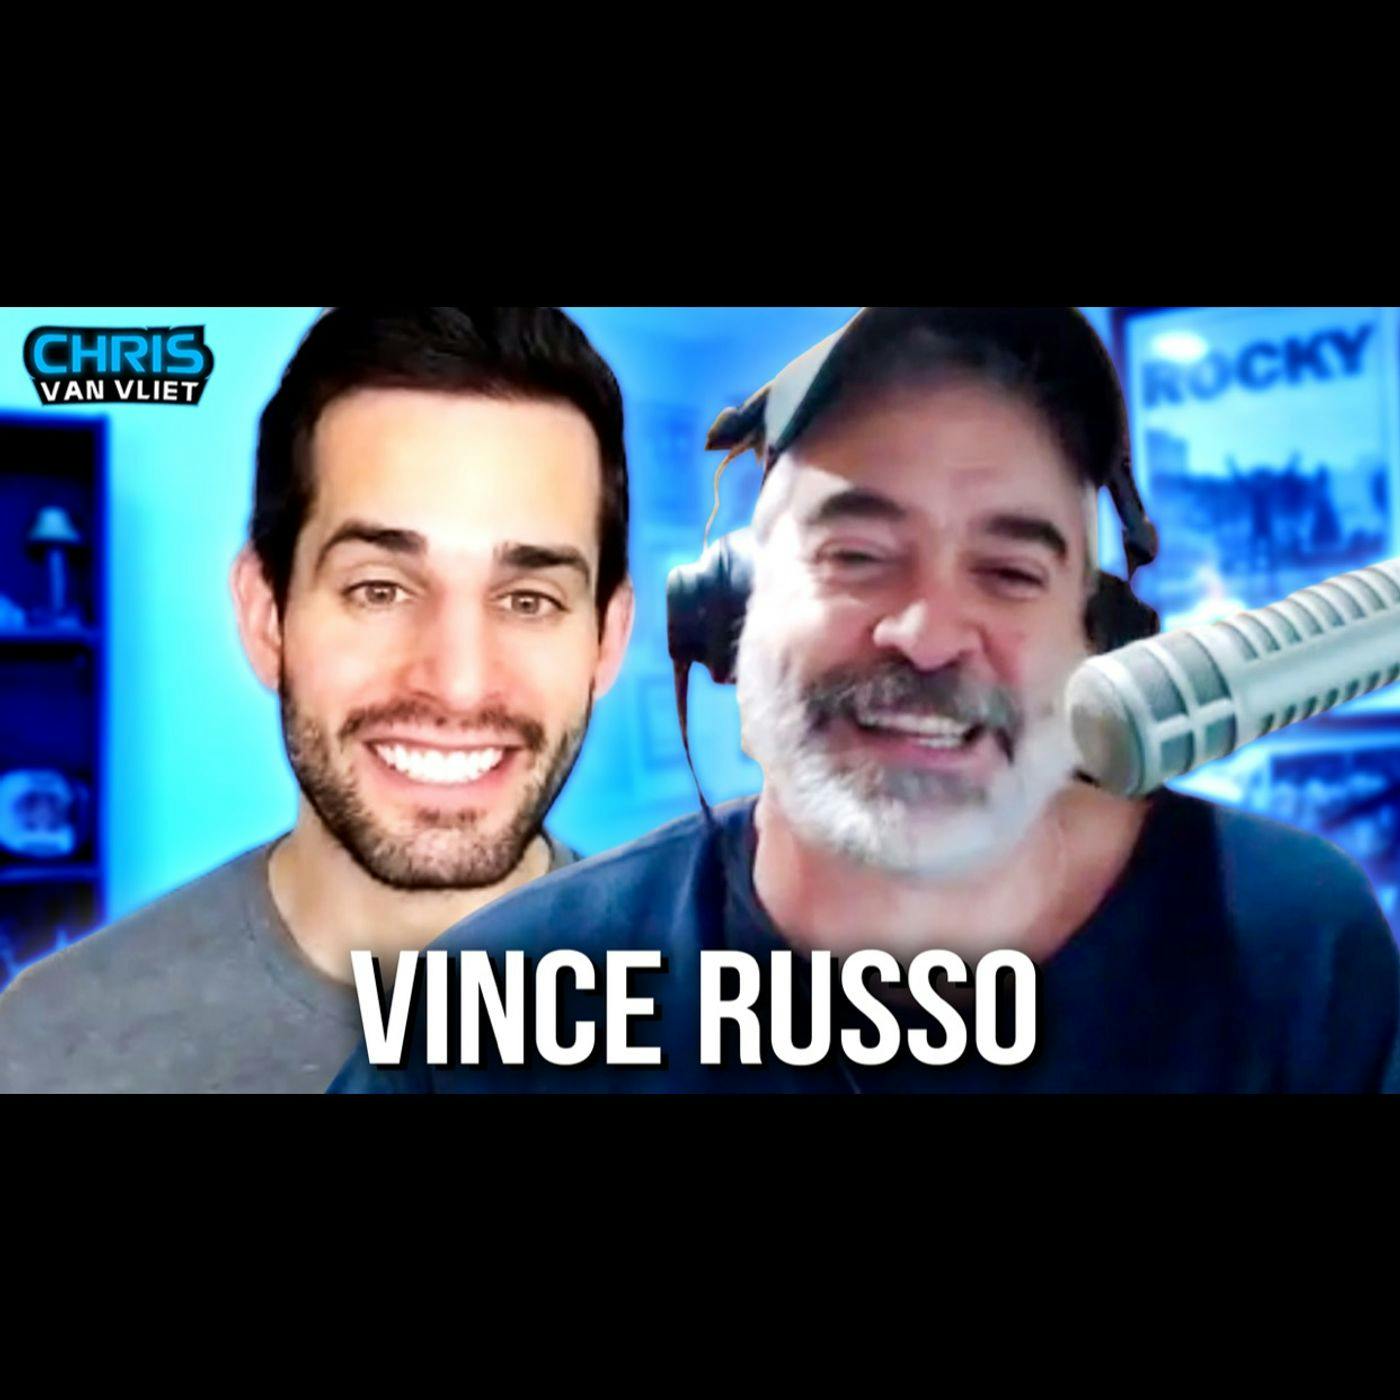 Vince Russo says he has only one regret, what people misunderstand about him, winning the WCW title